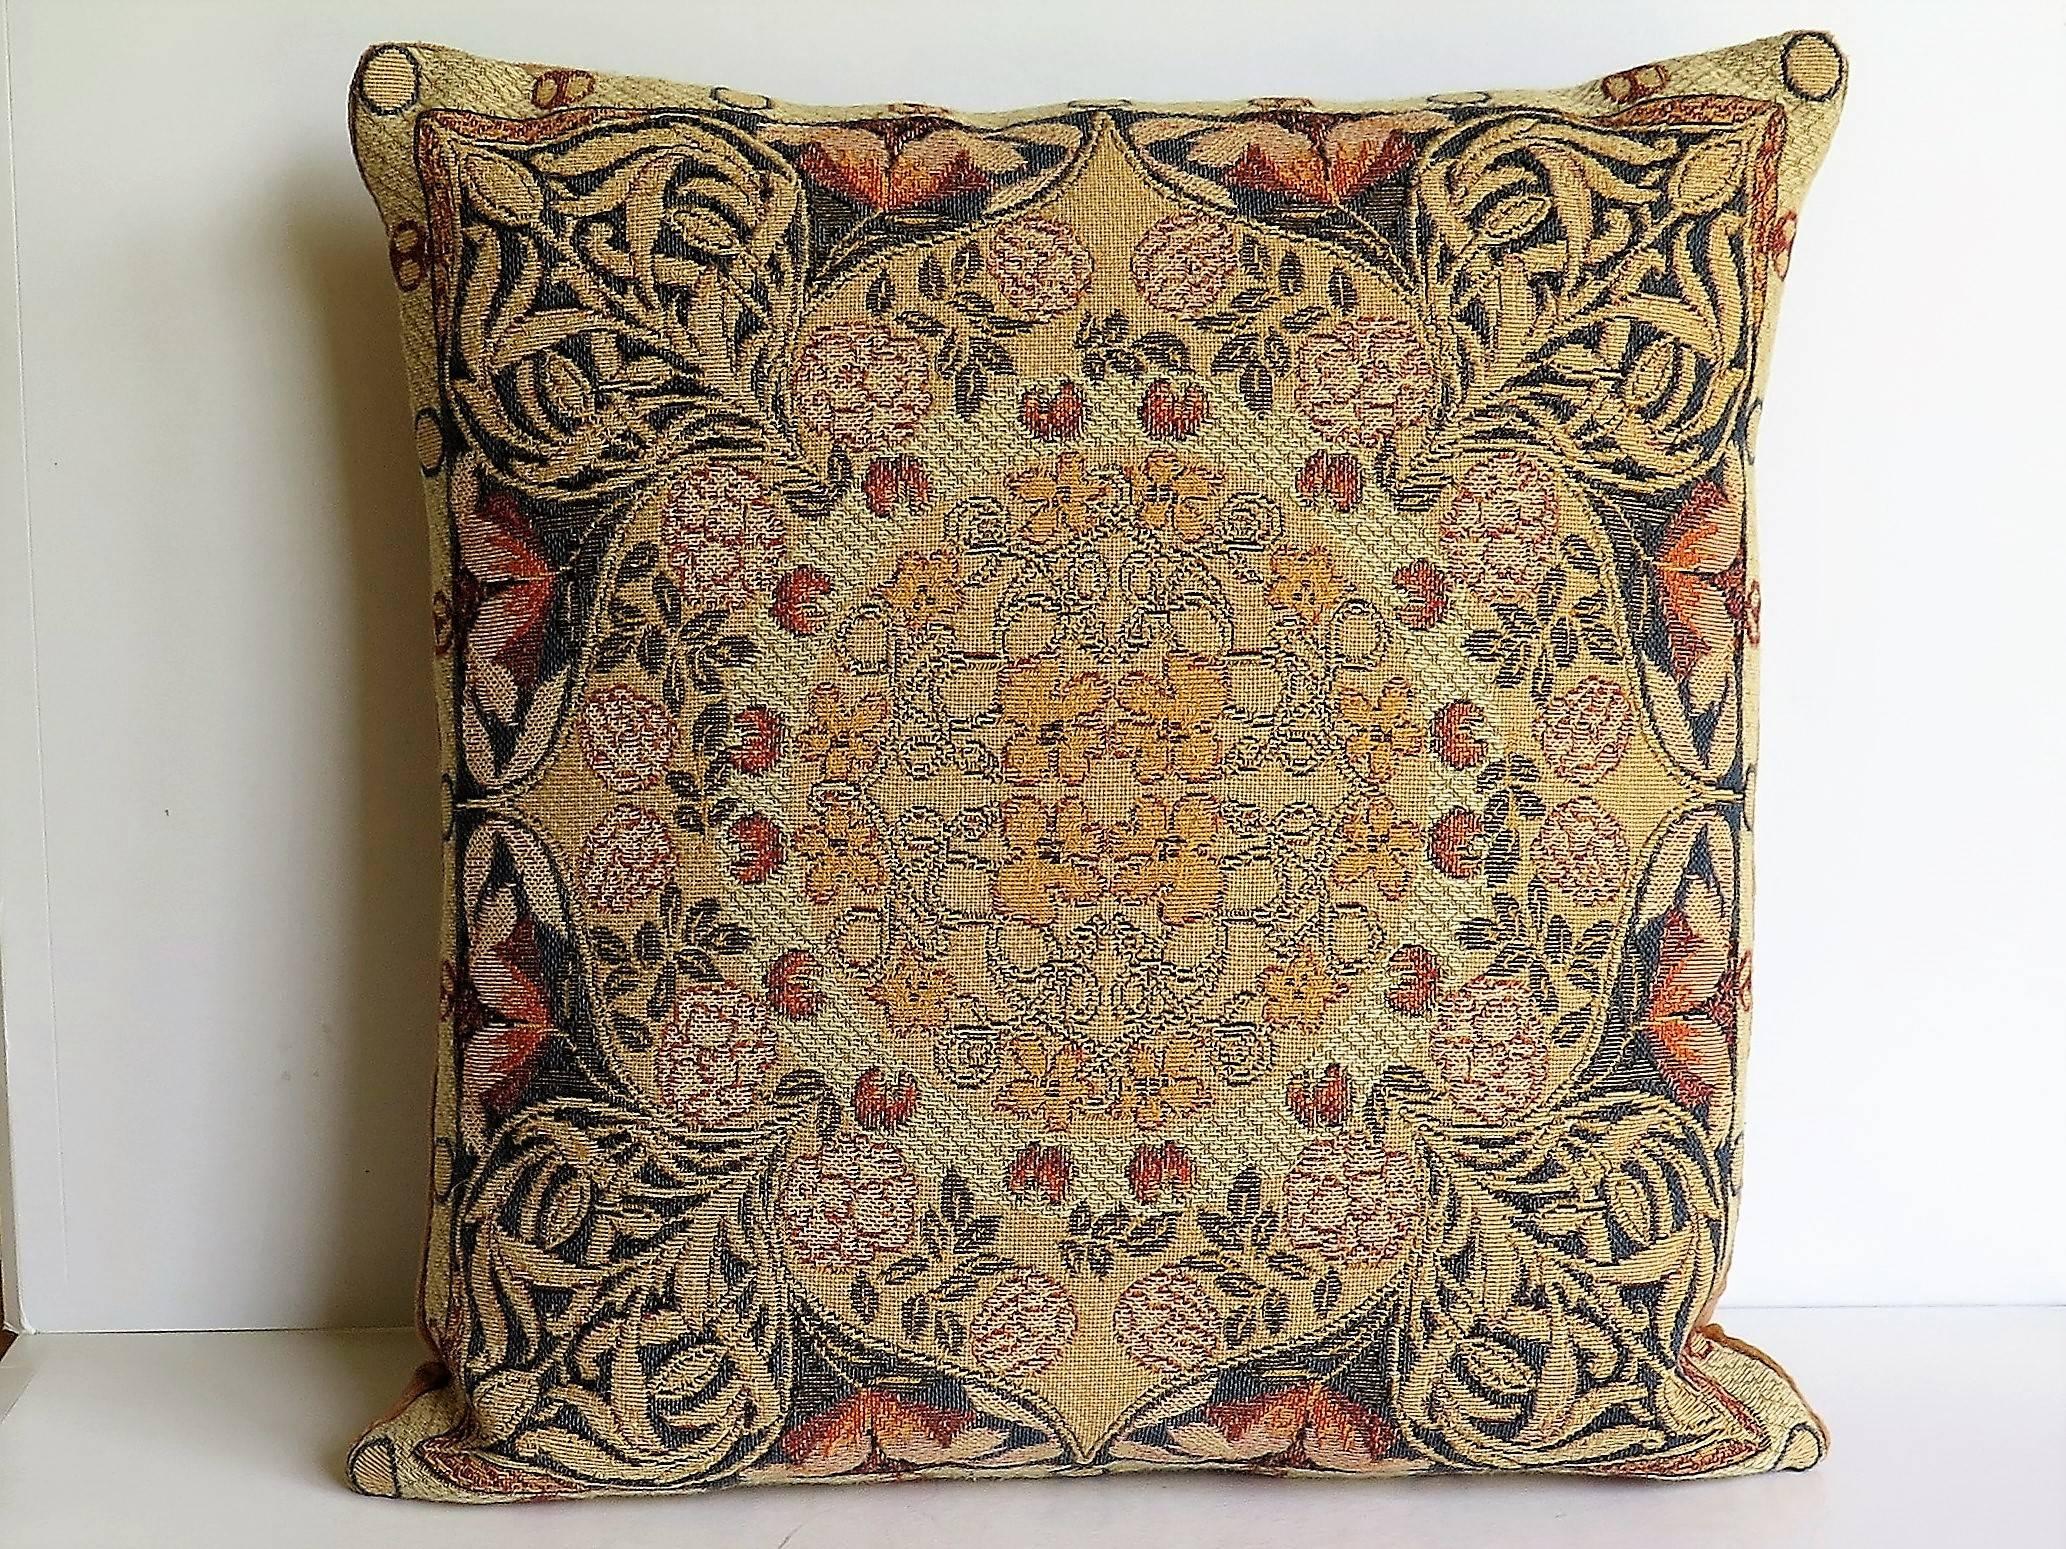 This is a very attractive woven tapestry pillow or cushion which we date to the mid-20th century, probably of French origin.

The classical themed design was probably inspired by earlier Flemish designs and has an Art Nouveau style, depicting a